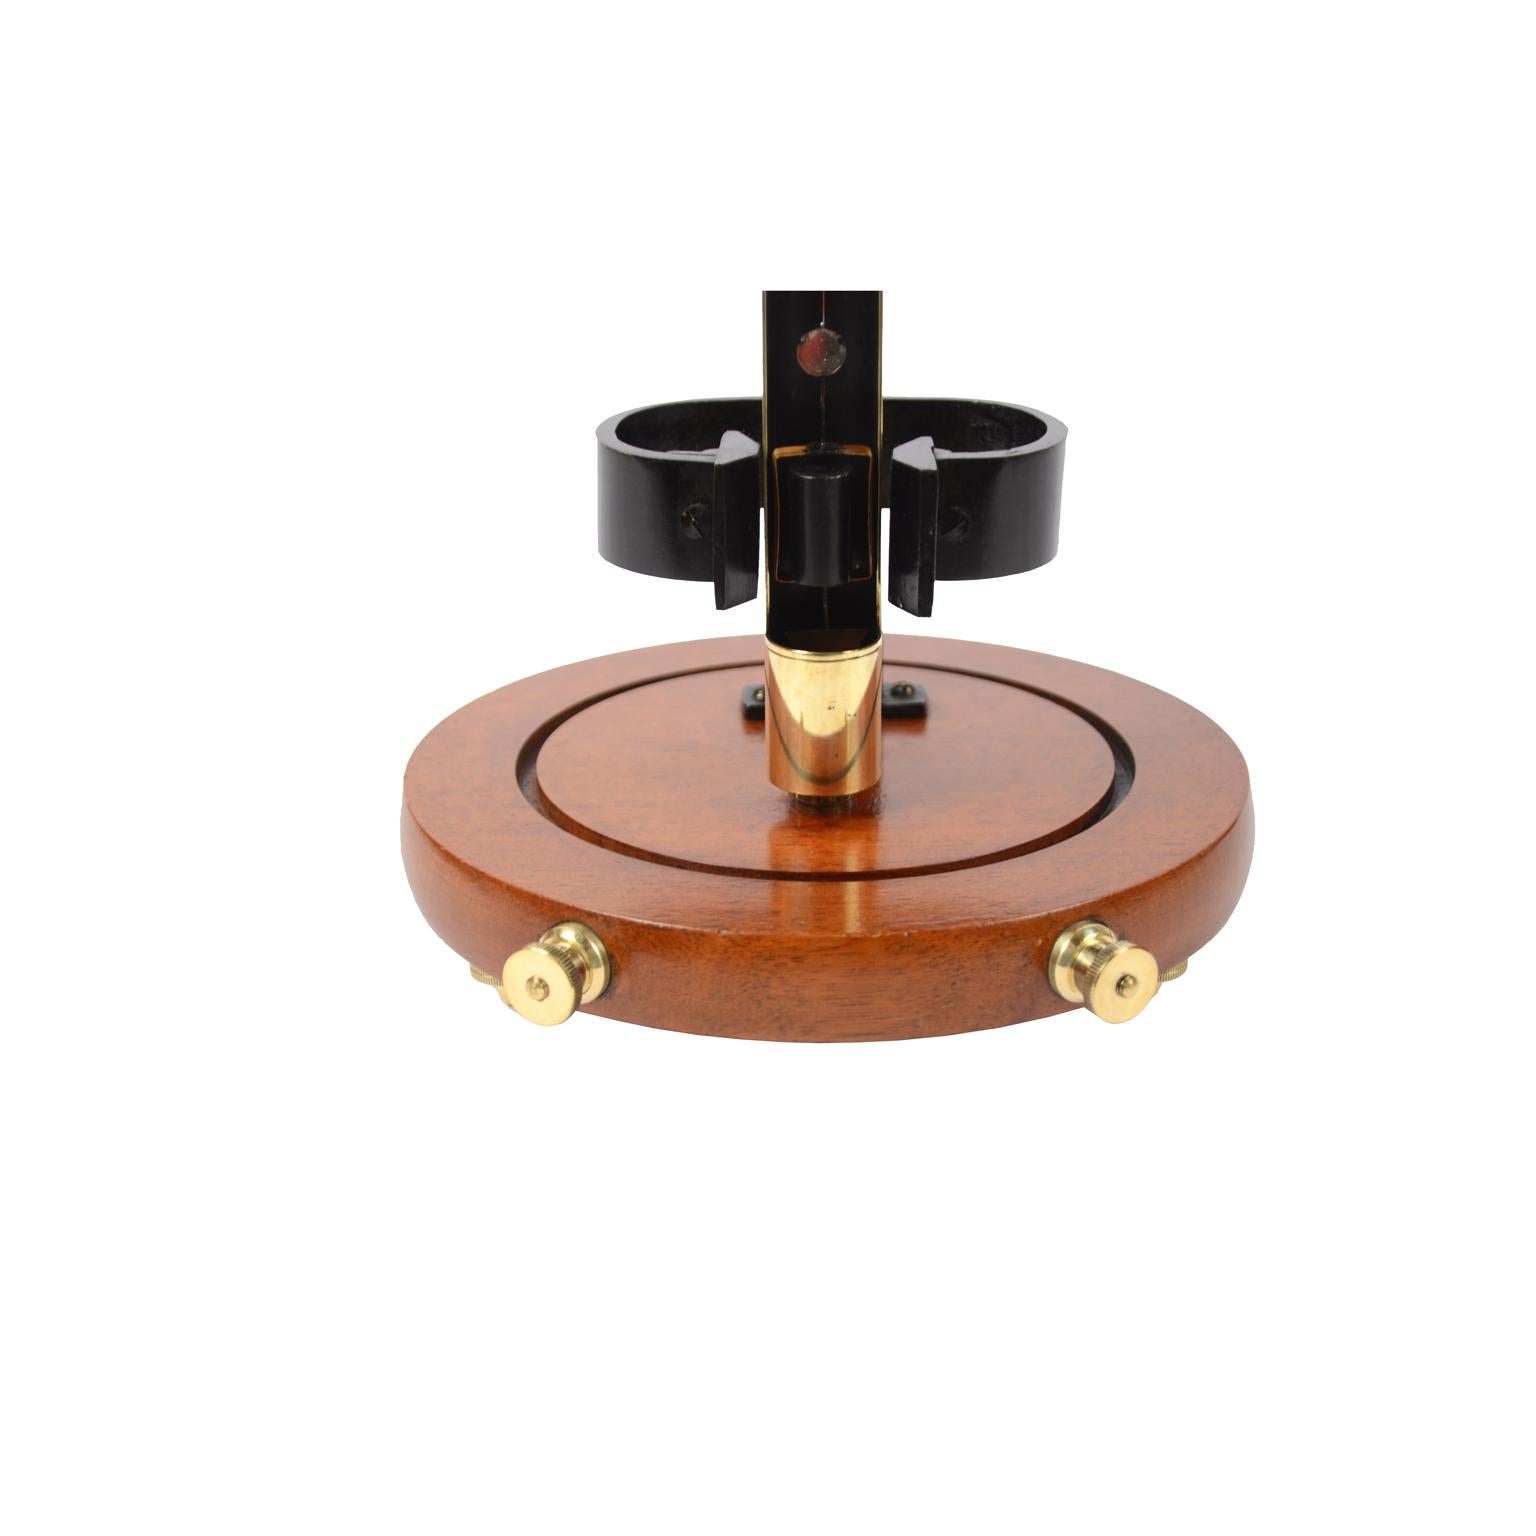 British Brass Galvanometer with Glass Dome and Wooden Base